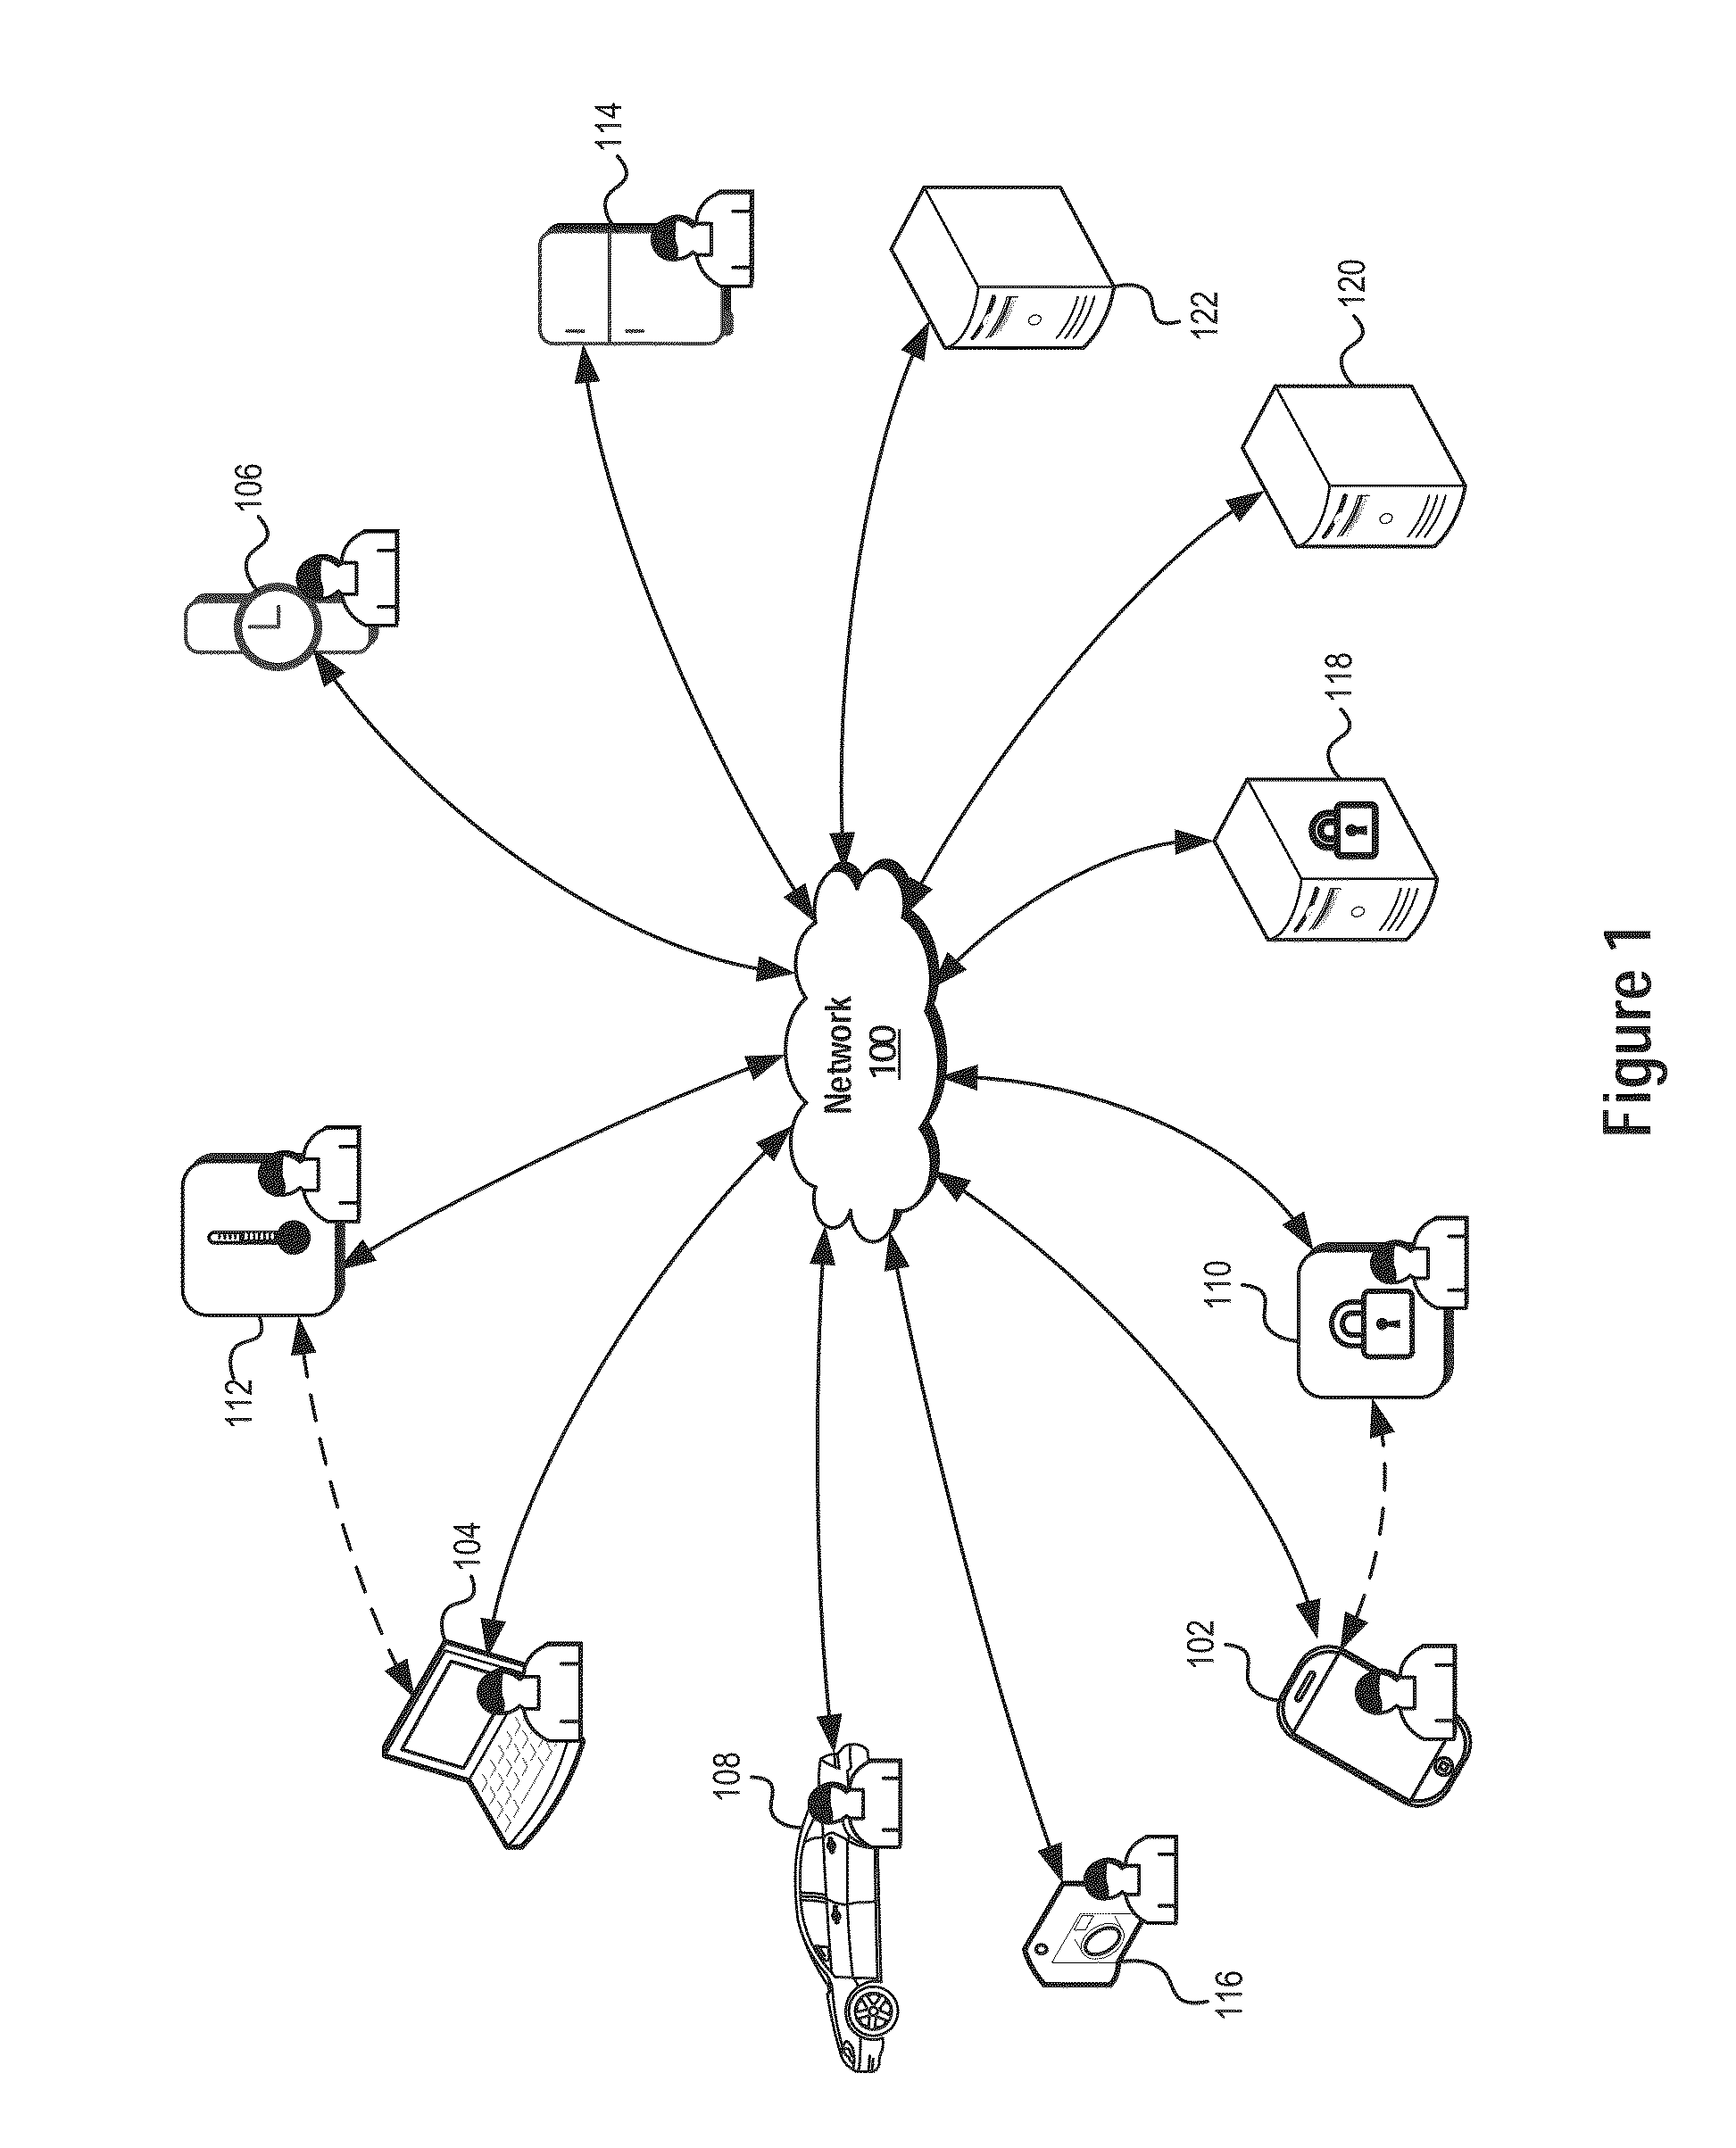 Network security systems and methods